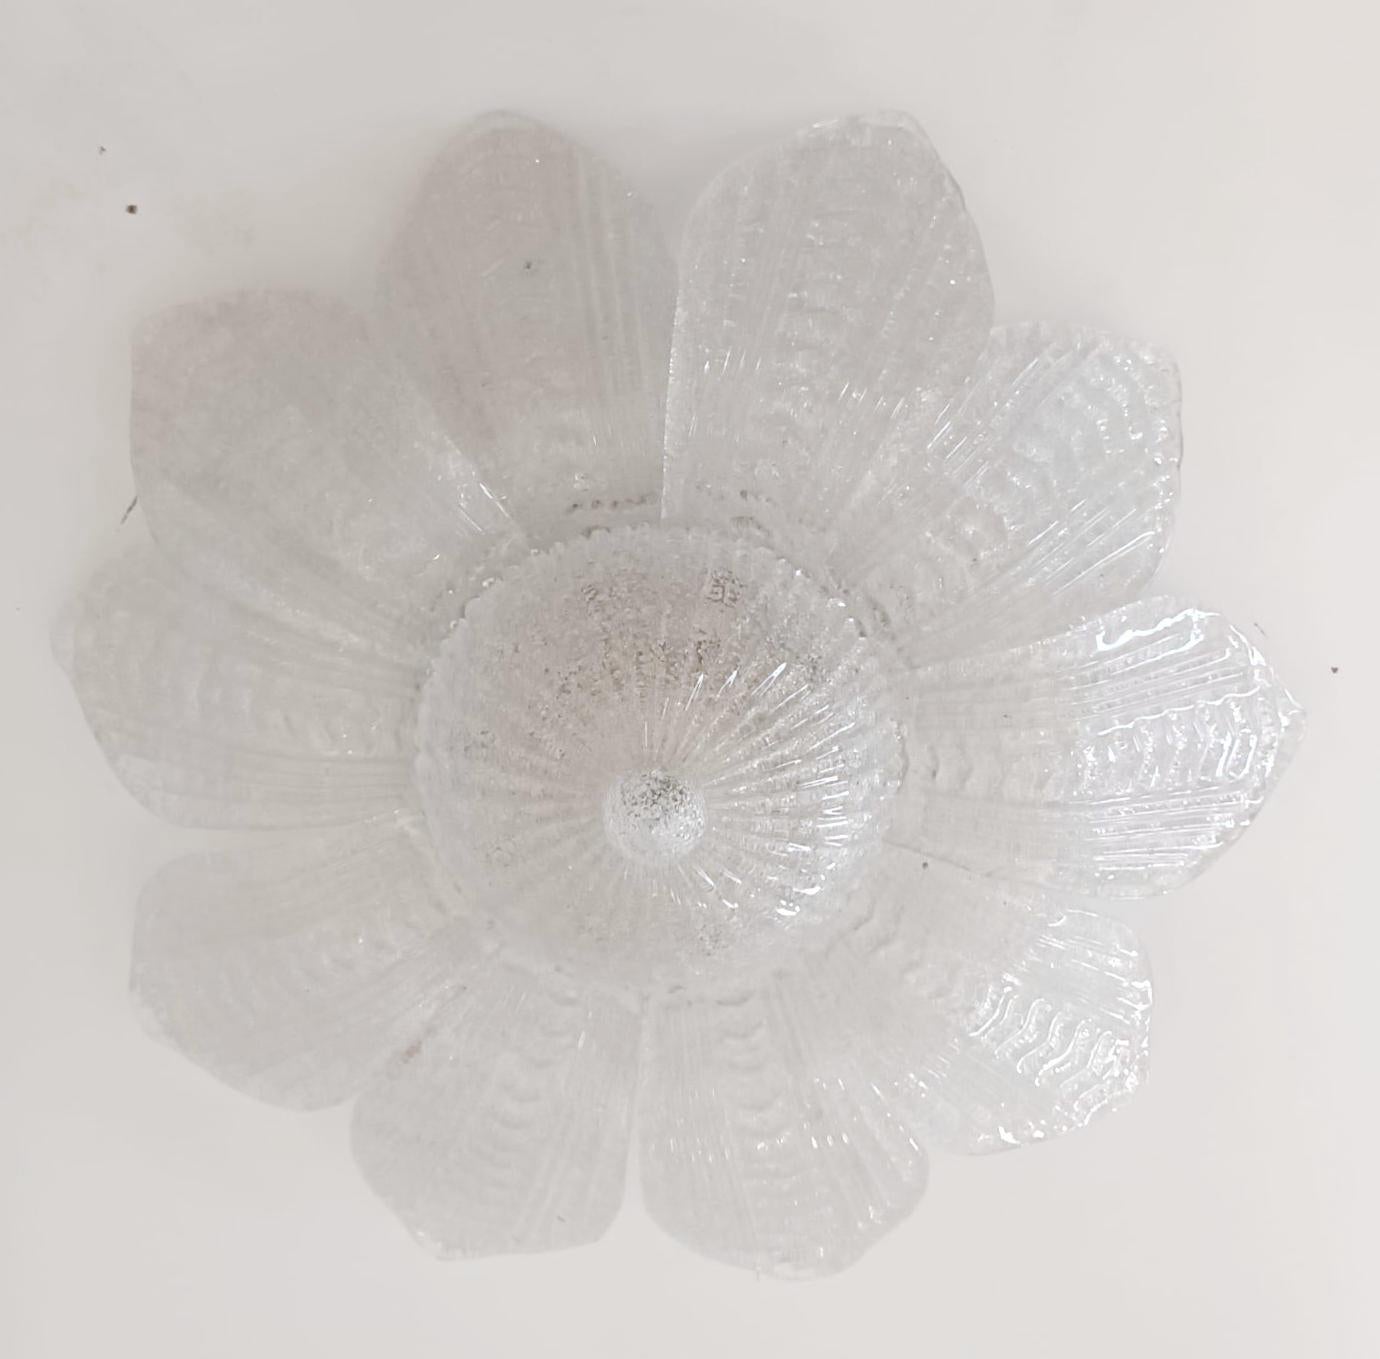 Vintage Italian Murano glass flush mount with clear graniglia glass leaves on brass metal frame / Made in Italy, circa 1960s.
3 lights / E26 or E27 type / max 60W each.
Measures: Diameter 22 inches, height 8.5 inches.
1 in stock in Italy.
Order